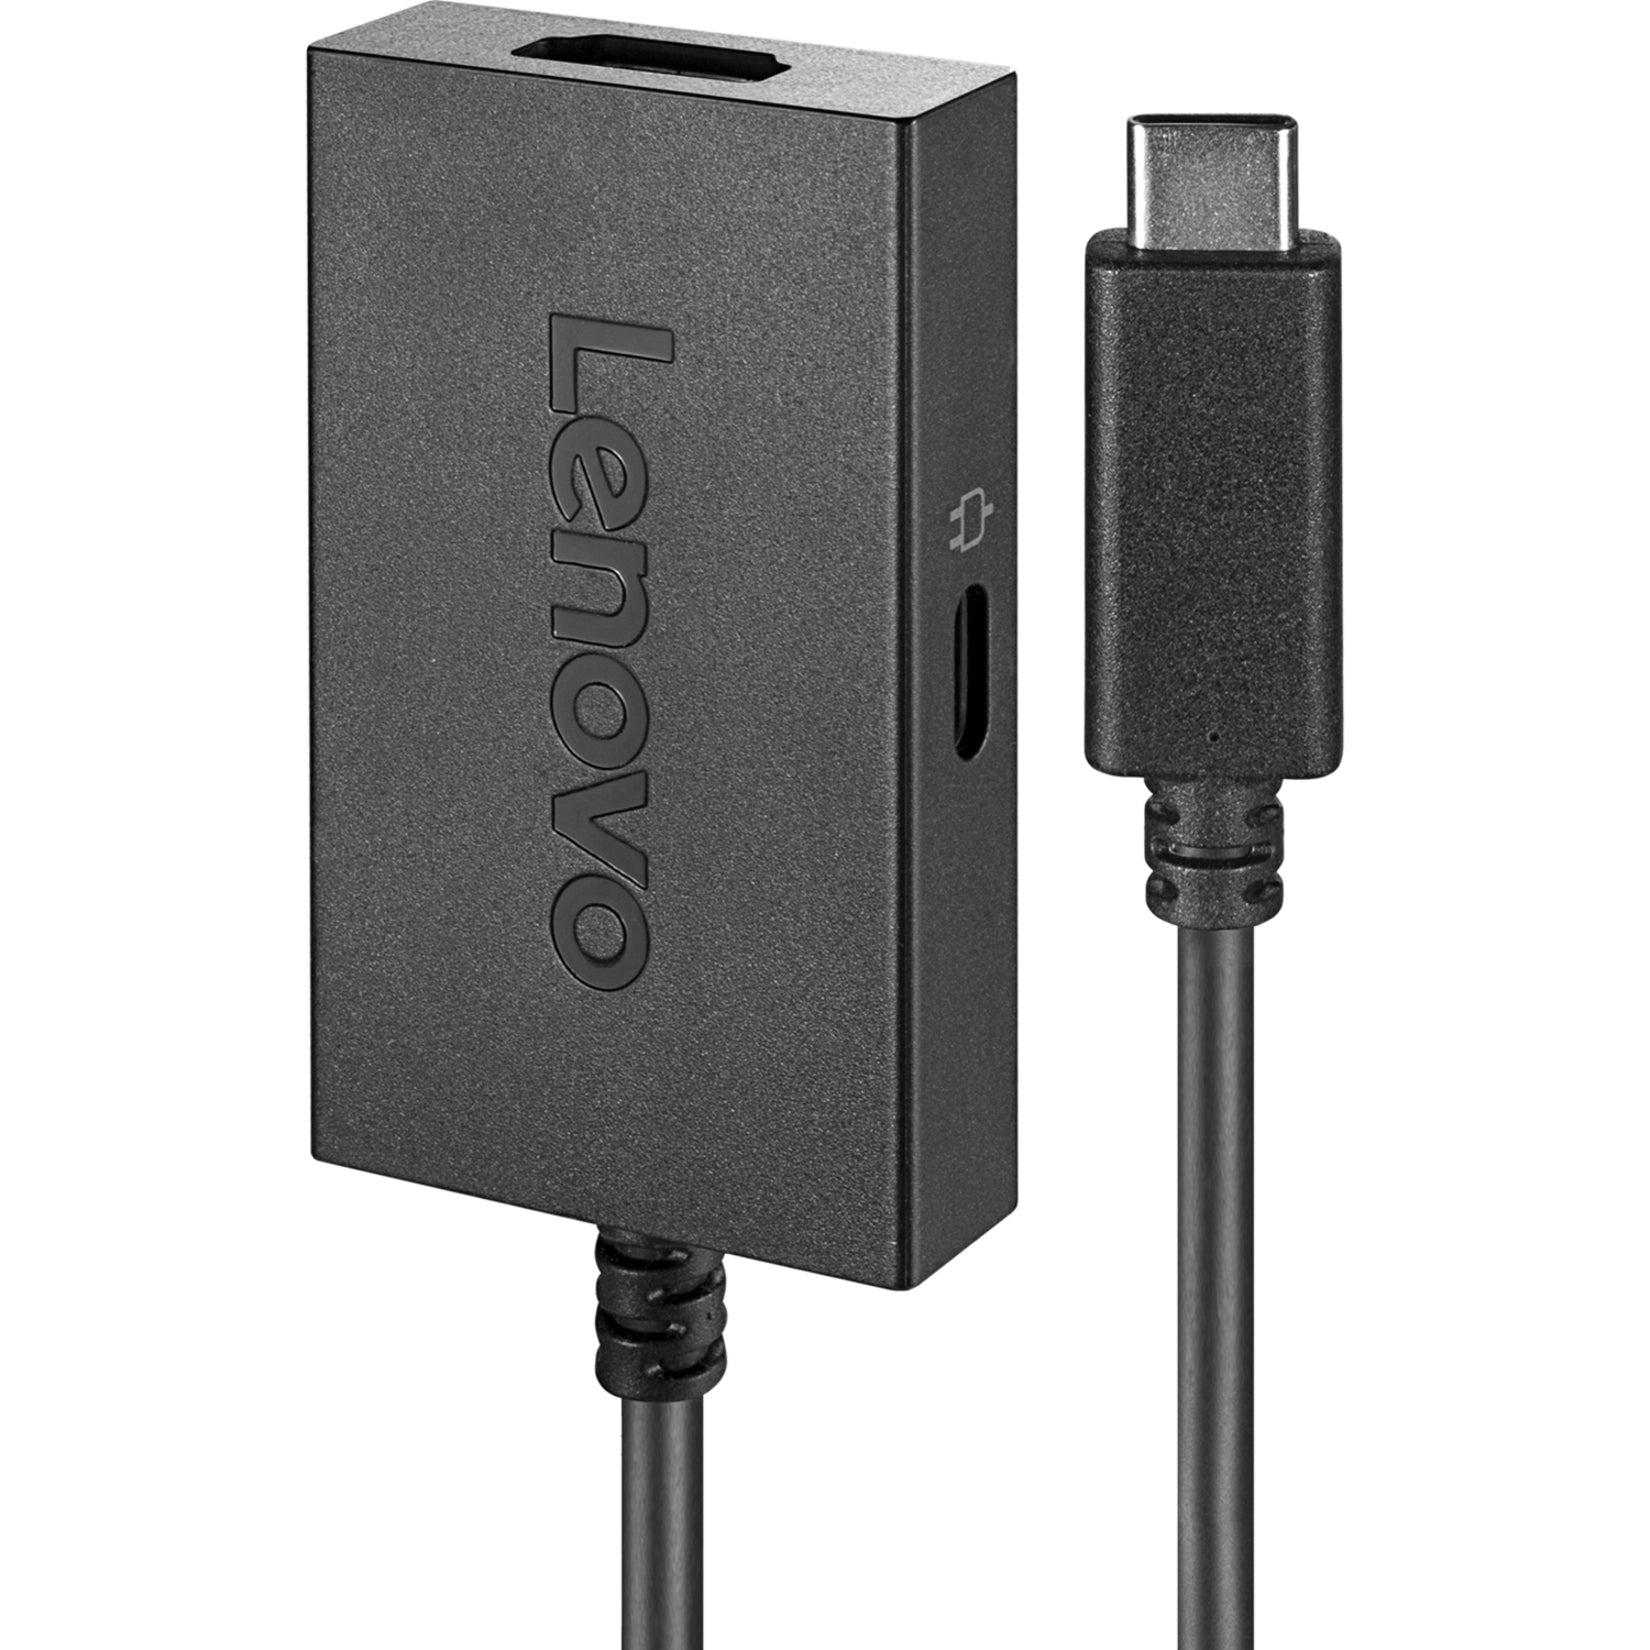 Lenovo 4X90K86567 USB-C to HDMI Plus Power Adapter, Charge and Connect Your Devices with Ease